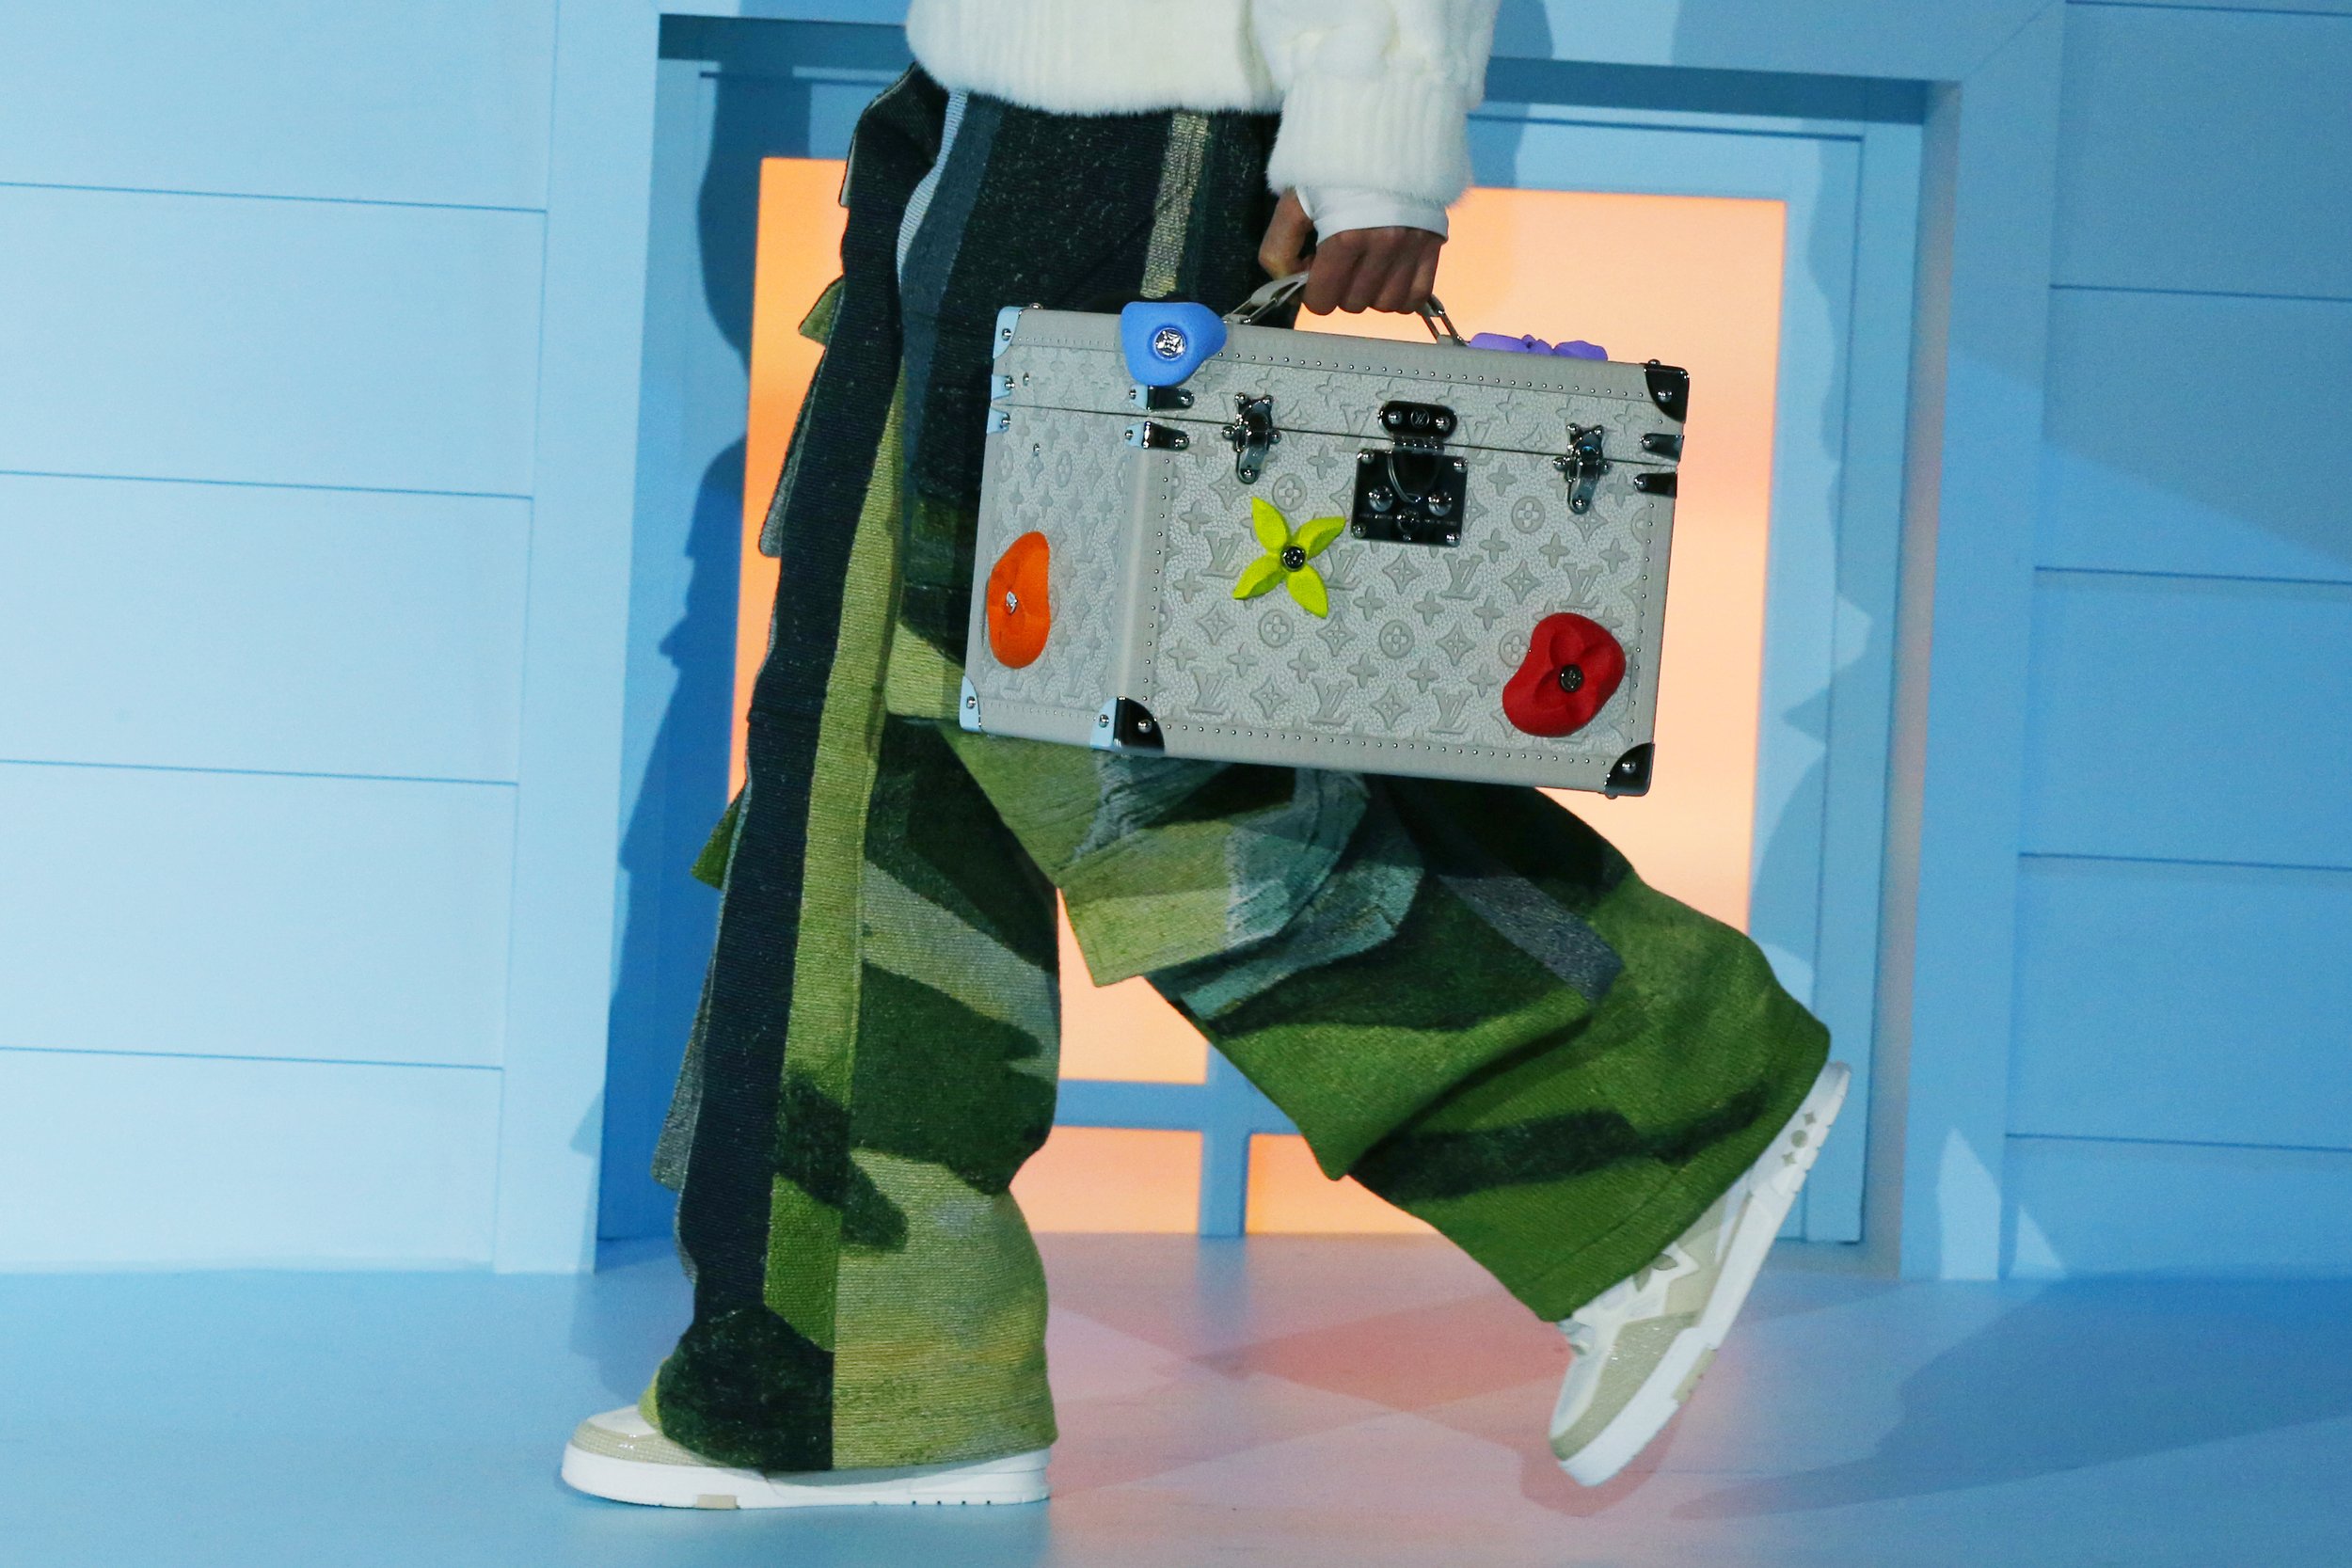 Virgil Abloh's 8th and Final Collection For Louis Vuitton